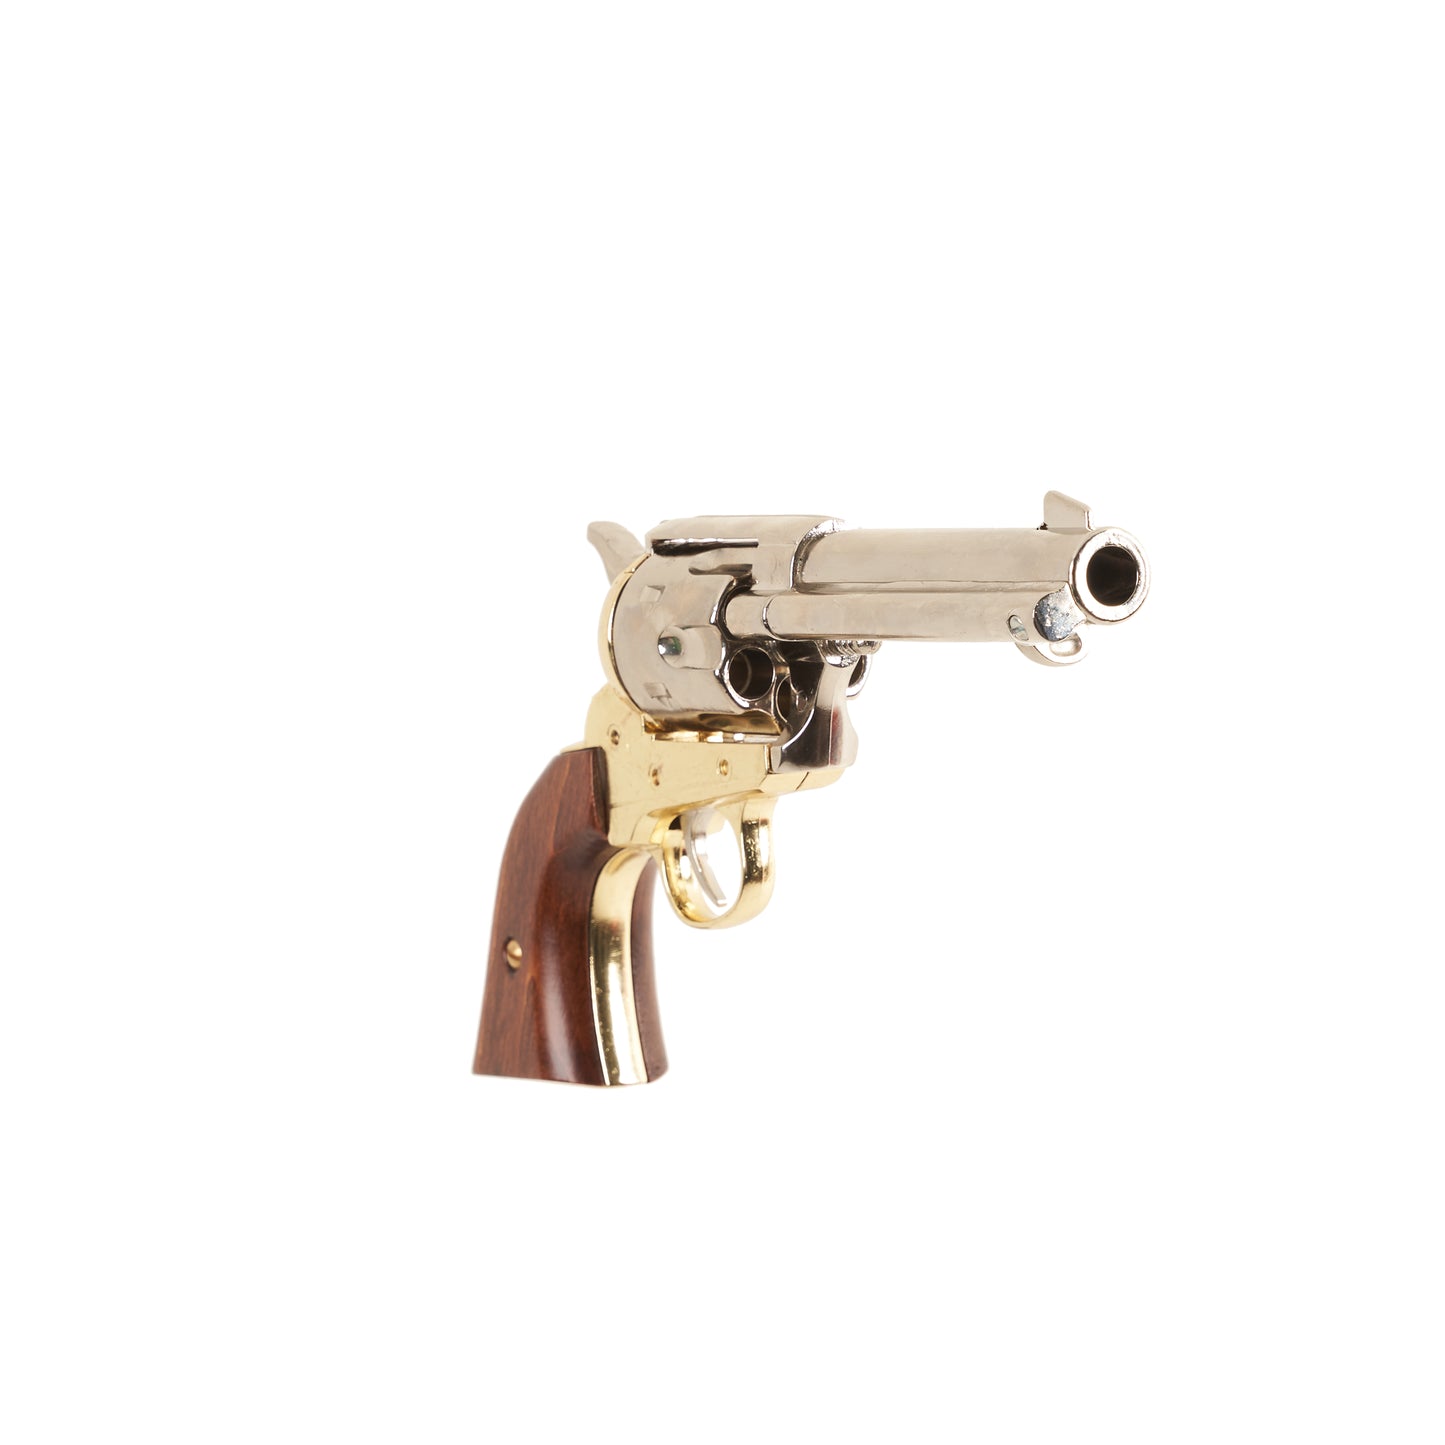 Front view of polished nickel 1873 .45 Caliber Single Action Revovler with wood grip and brass trigger guard.